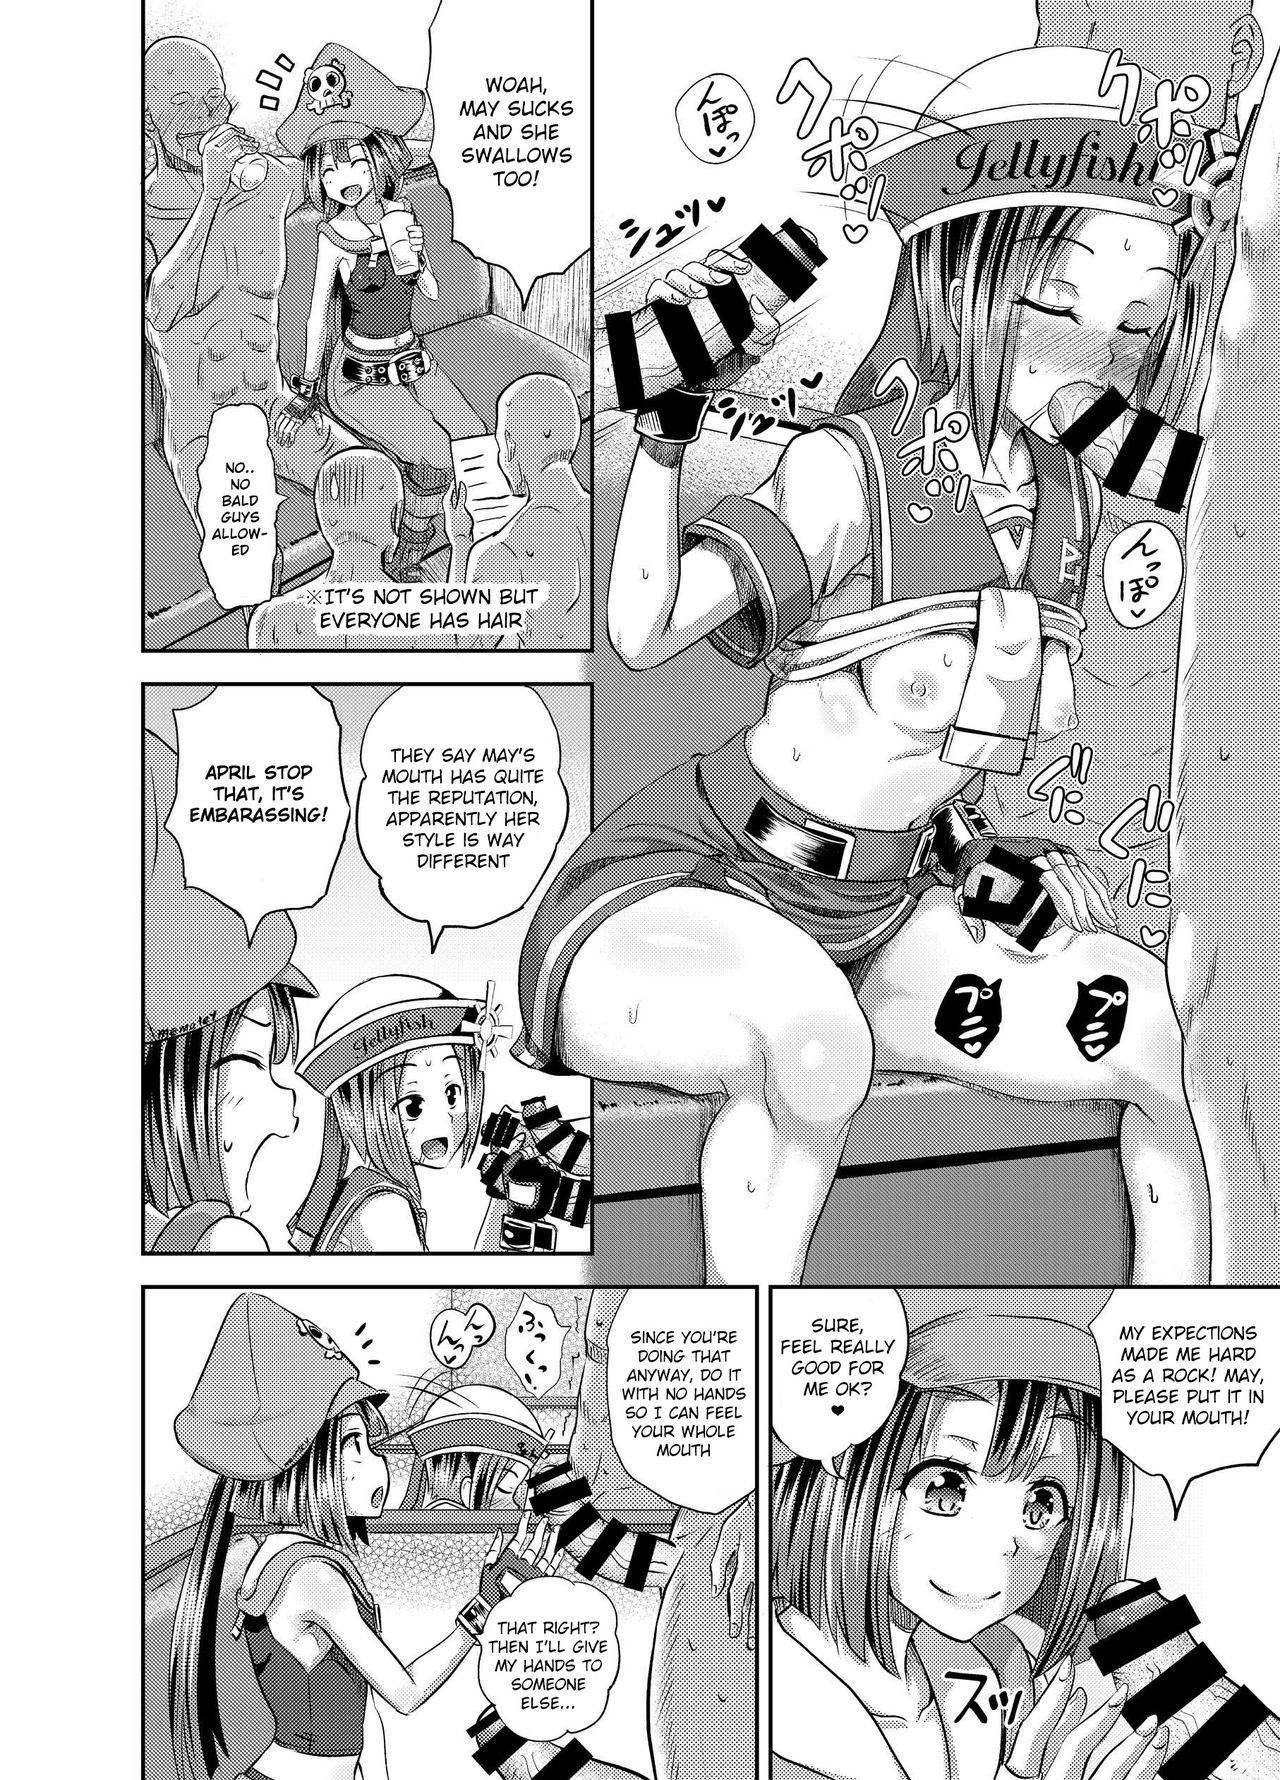 Finger Jellyfish Kaizokudan e Youkoso! | Welcome to The Jellyfish Pleasure Club! - Guilty gear Hardon - Page 5